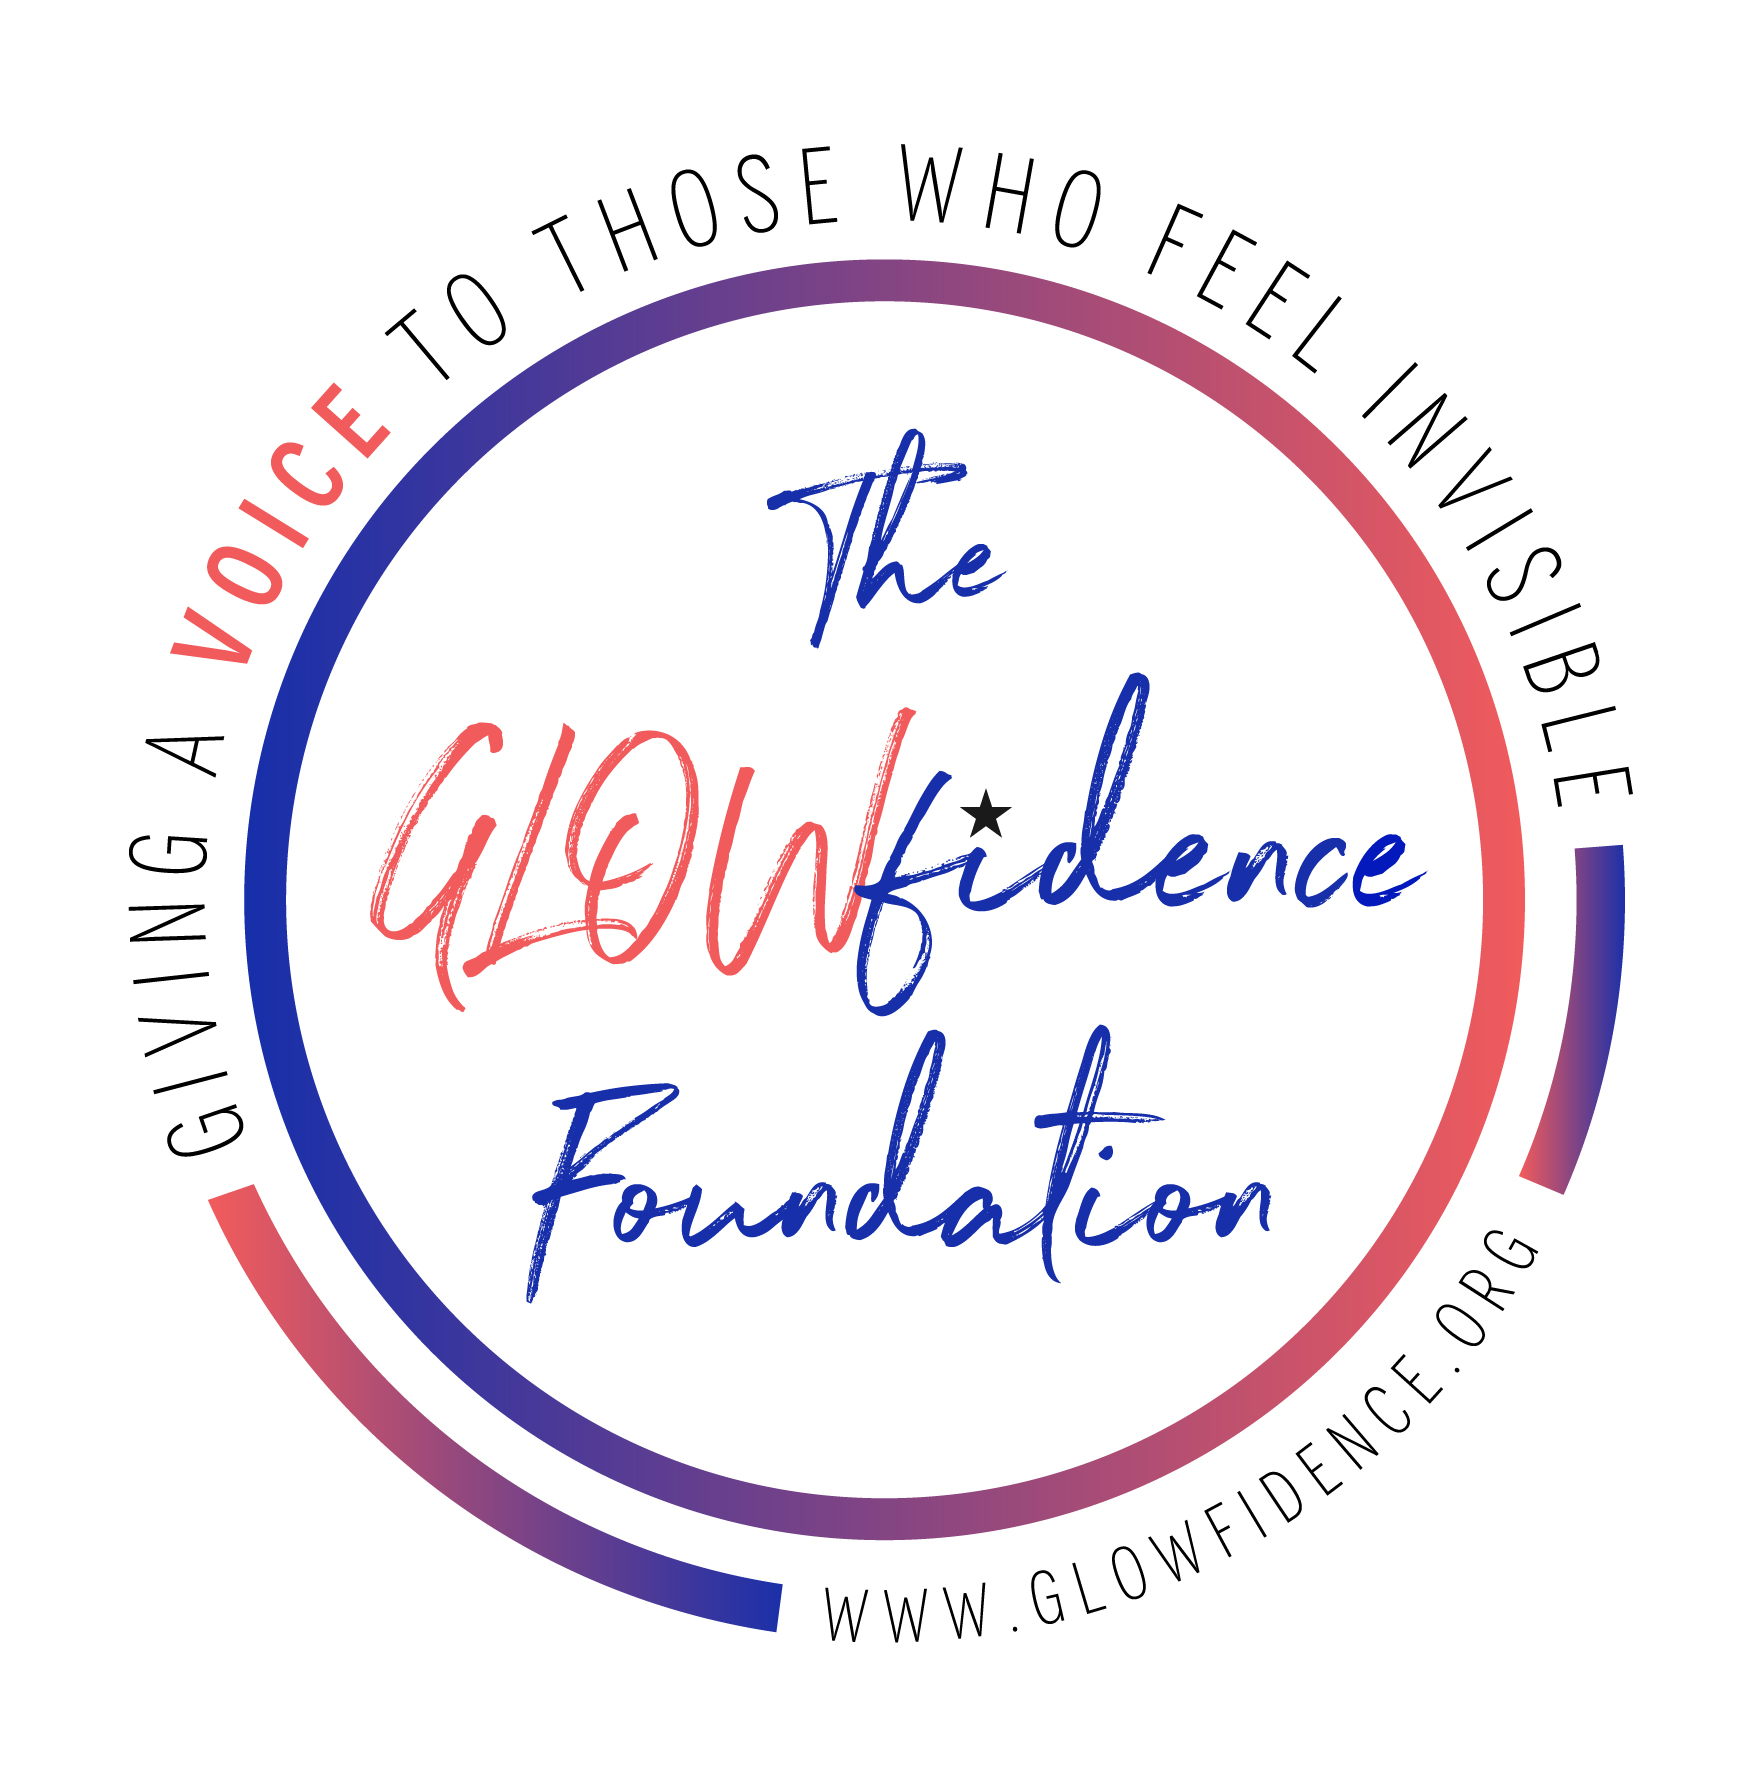 Glowfidence Foundation Teaches You How To Start Your Own Business